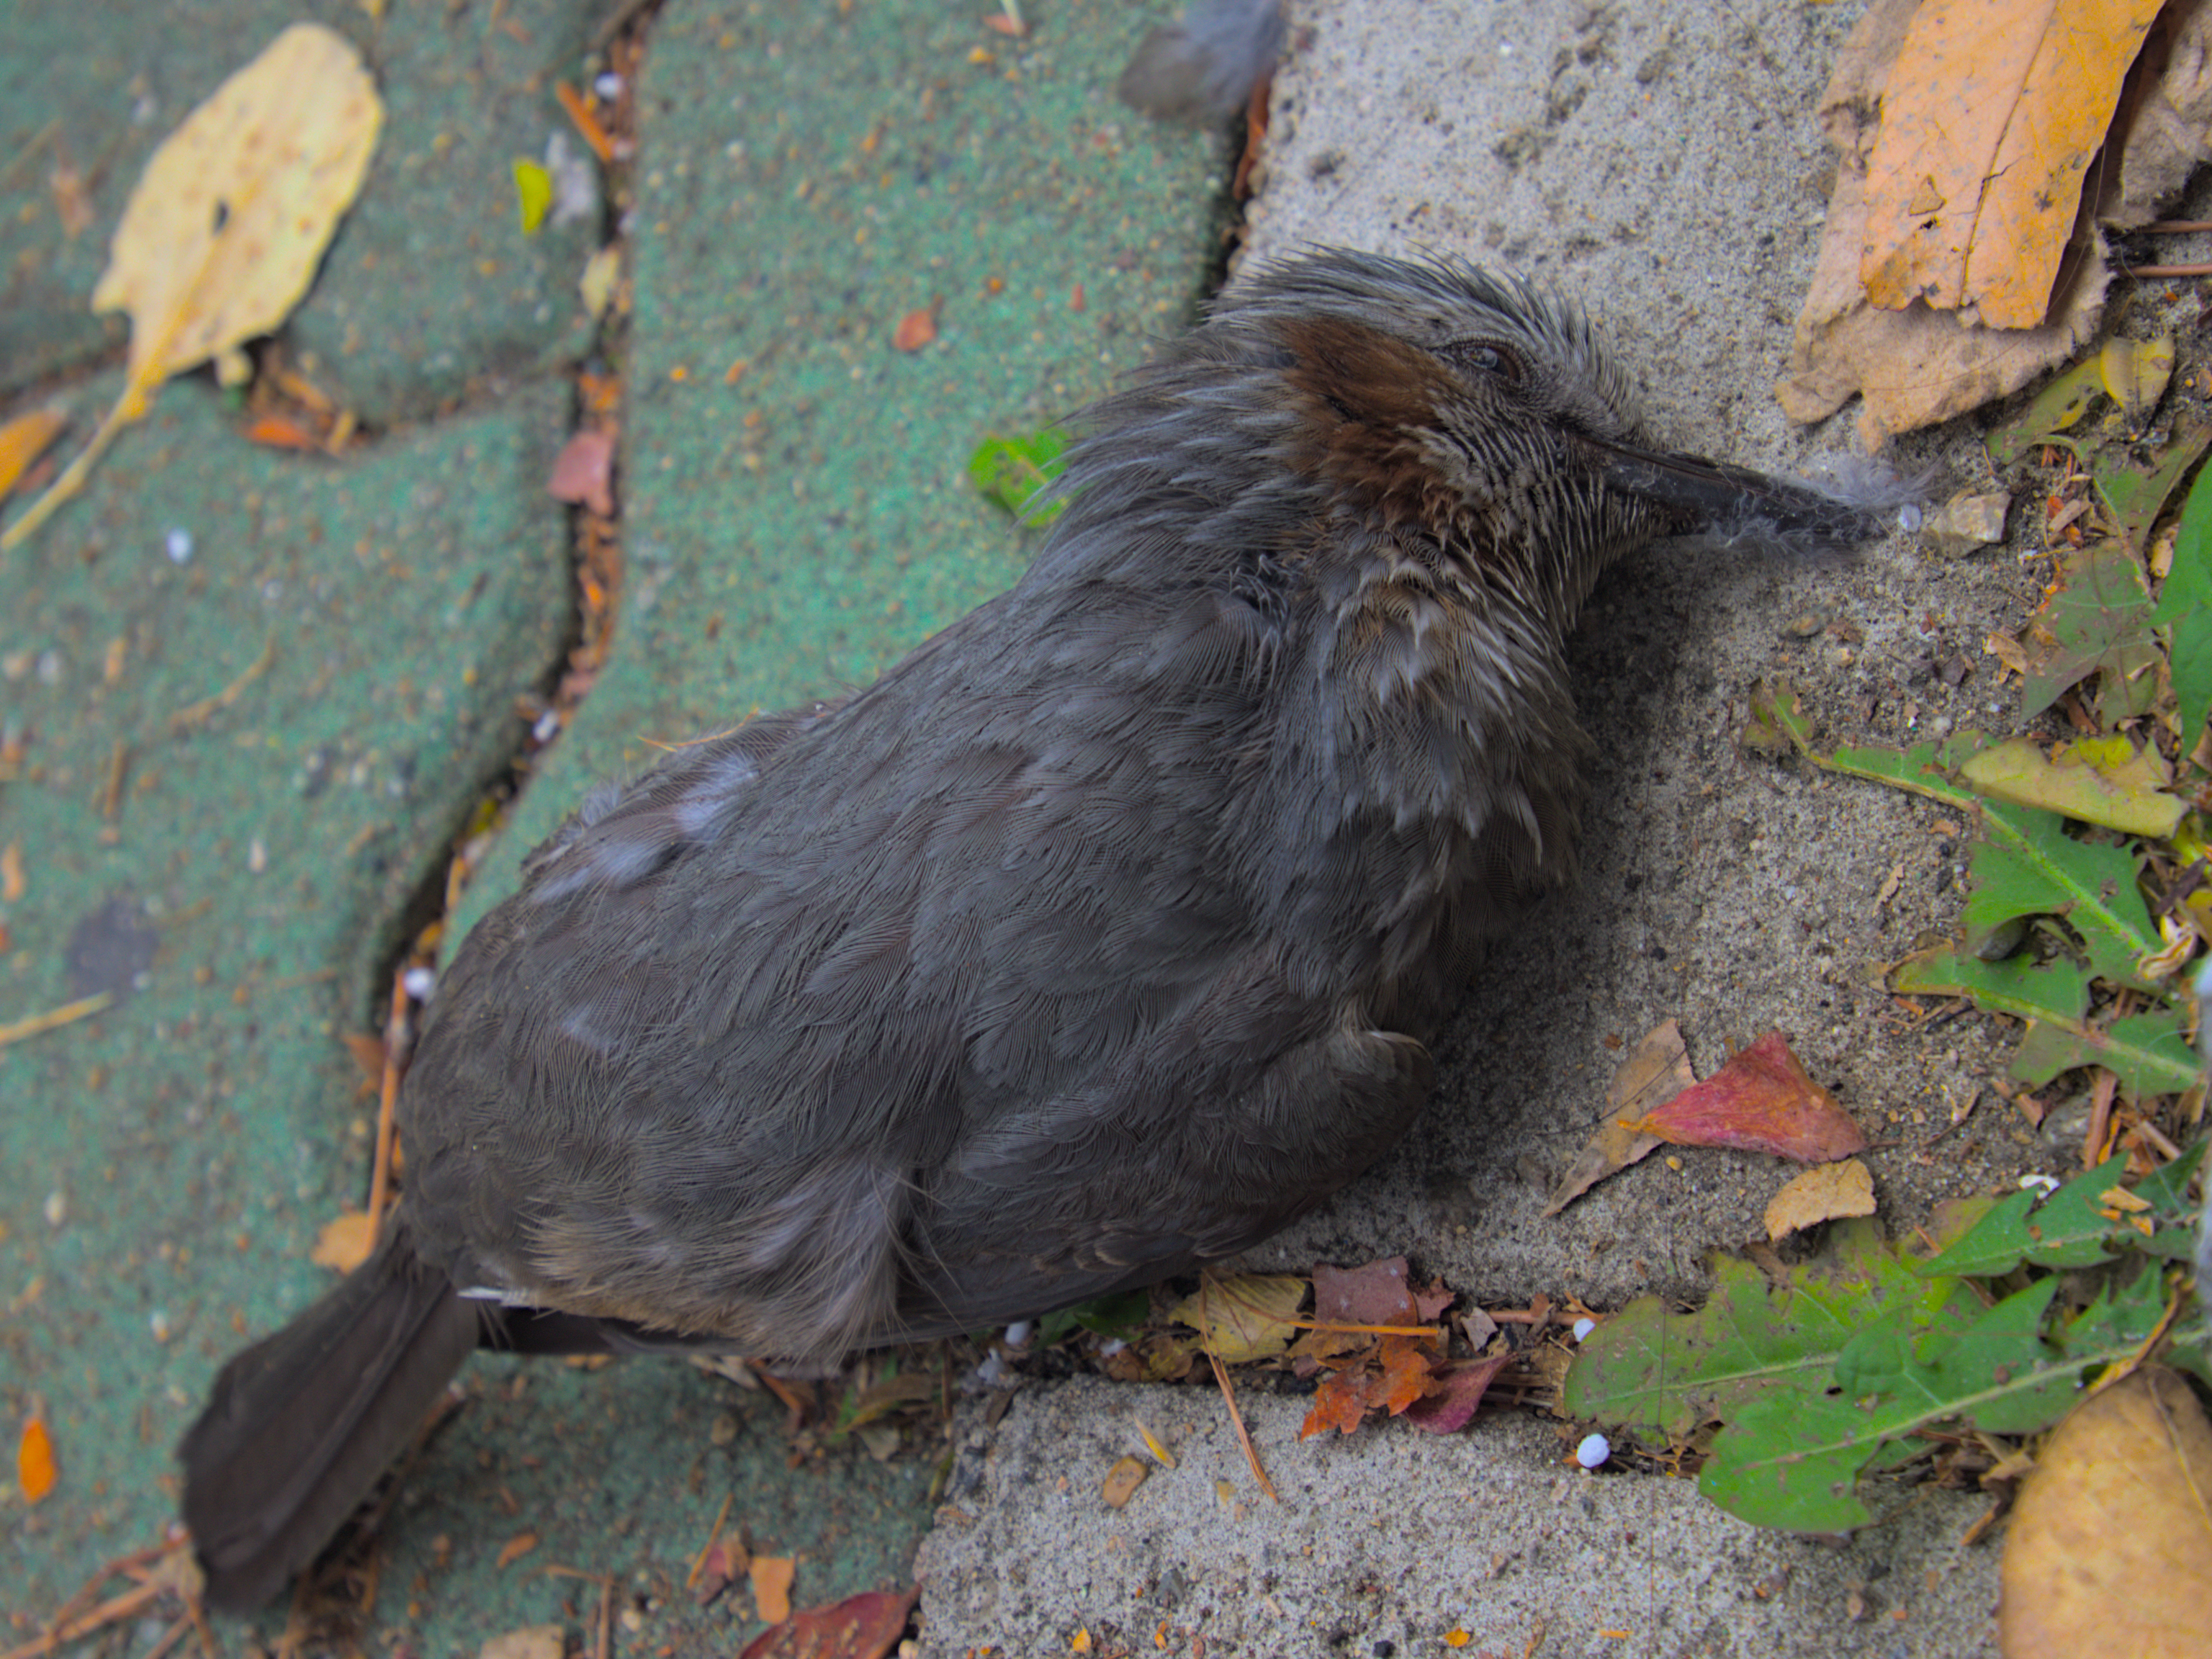 poor bird that died on a pavement